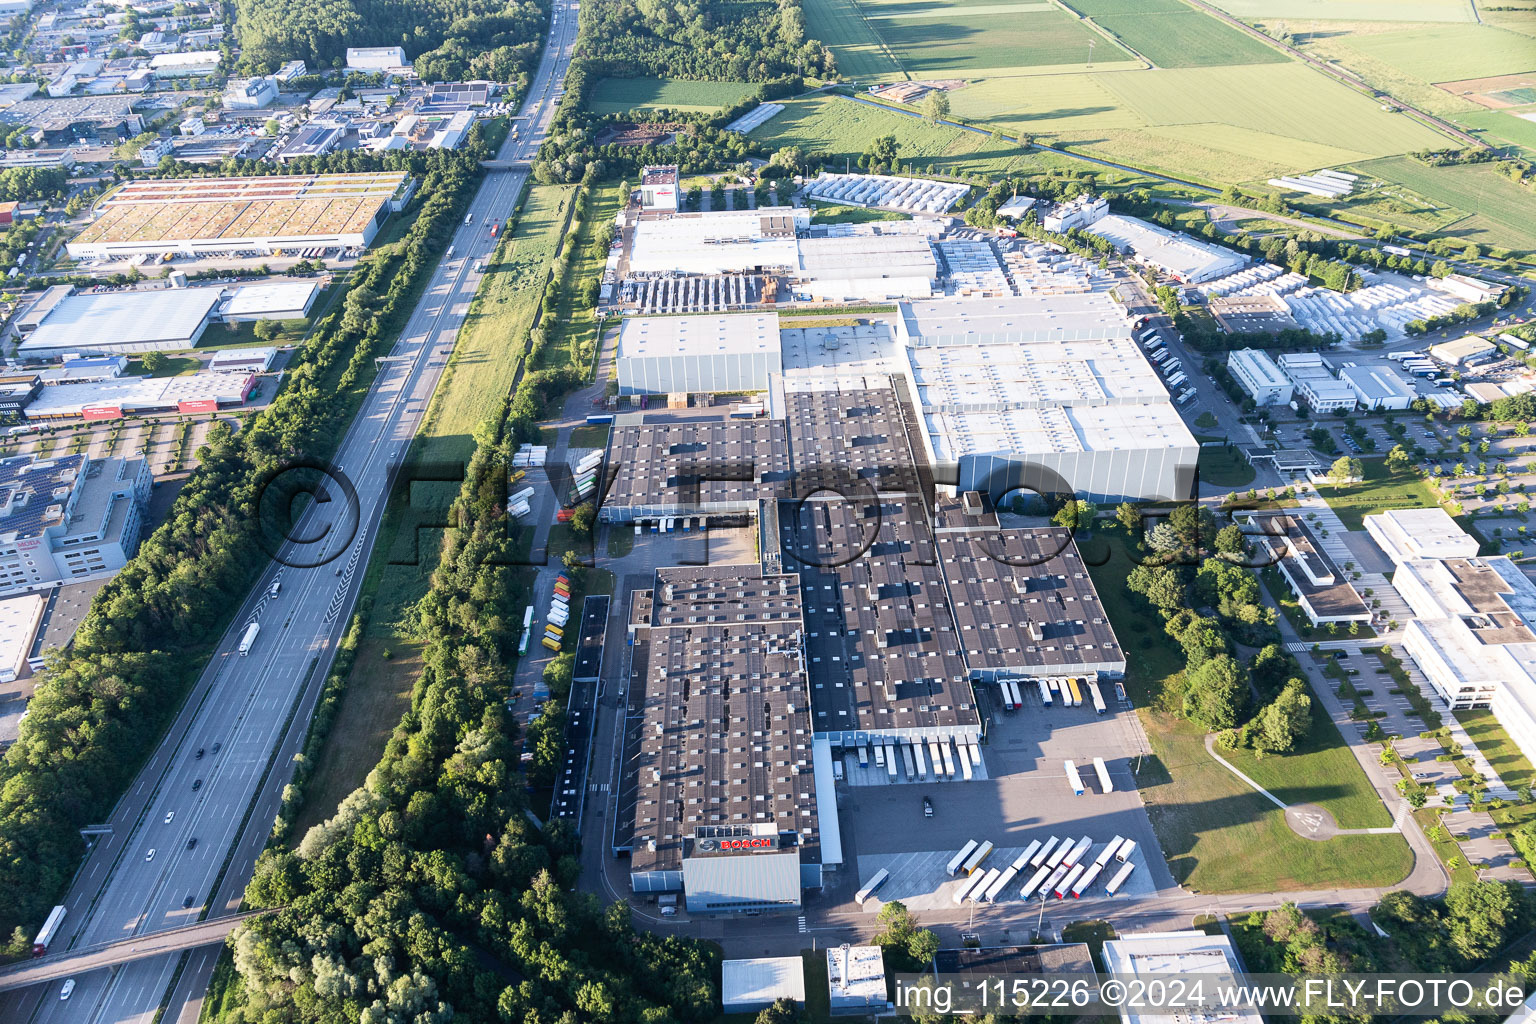 Aerial view of Buildings and production halls on the vehicle construction site Robert Bosch GmbH Auf of Breit in the district Durlach in Karlsruhe in the state Baden-Wurttemberg, Germany